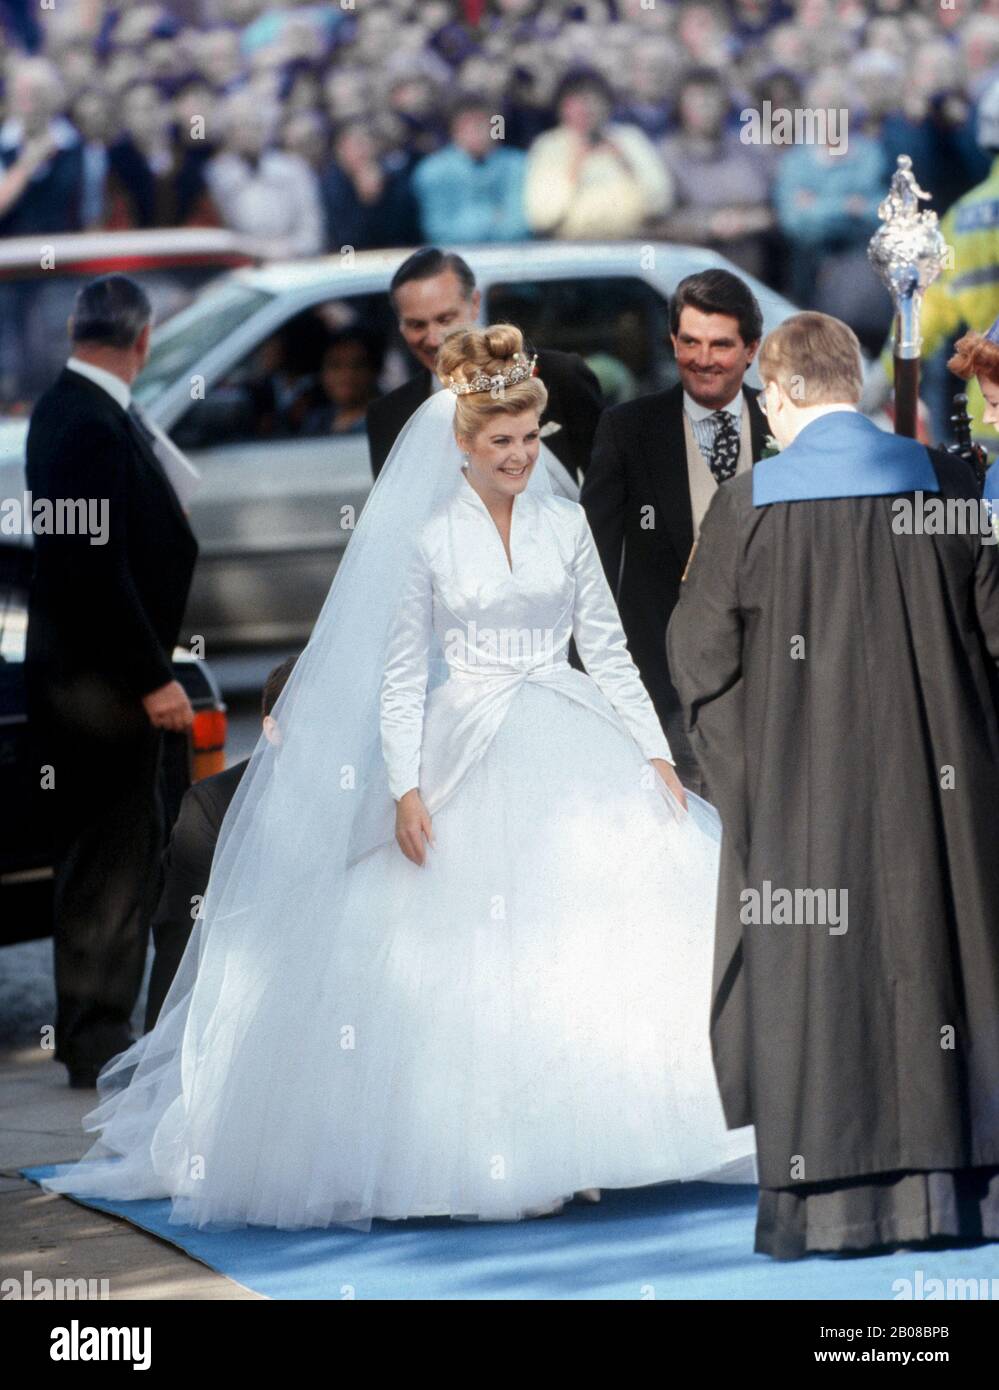 Serena Stanhope arrives for her wedding to Viscount Linley, Westminster, London, England 08.10.93 Stock Photo